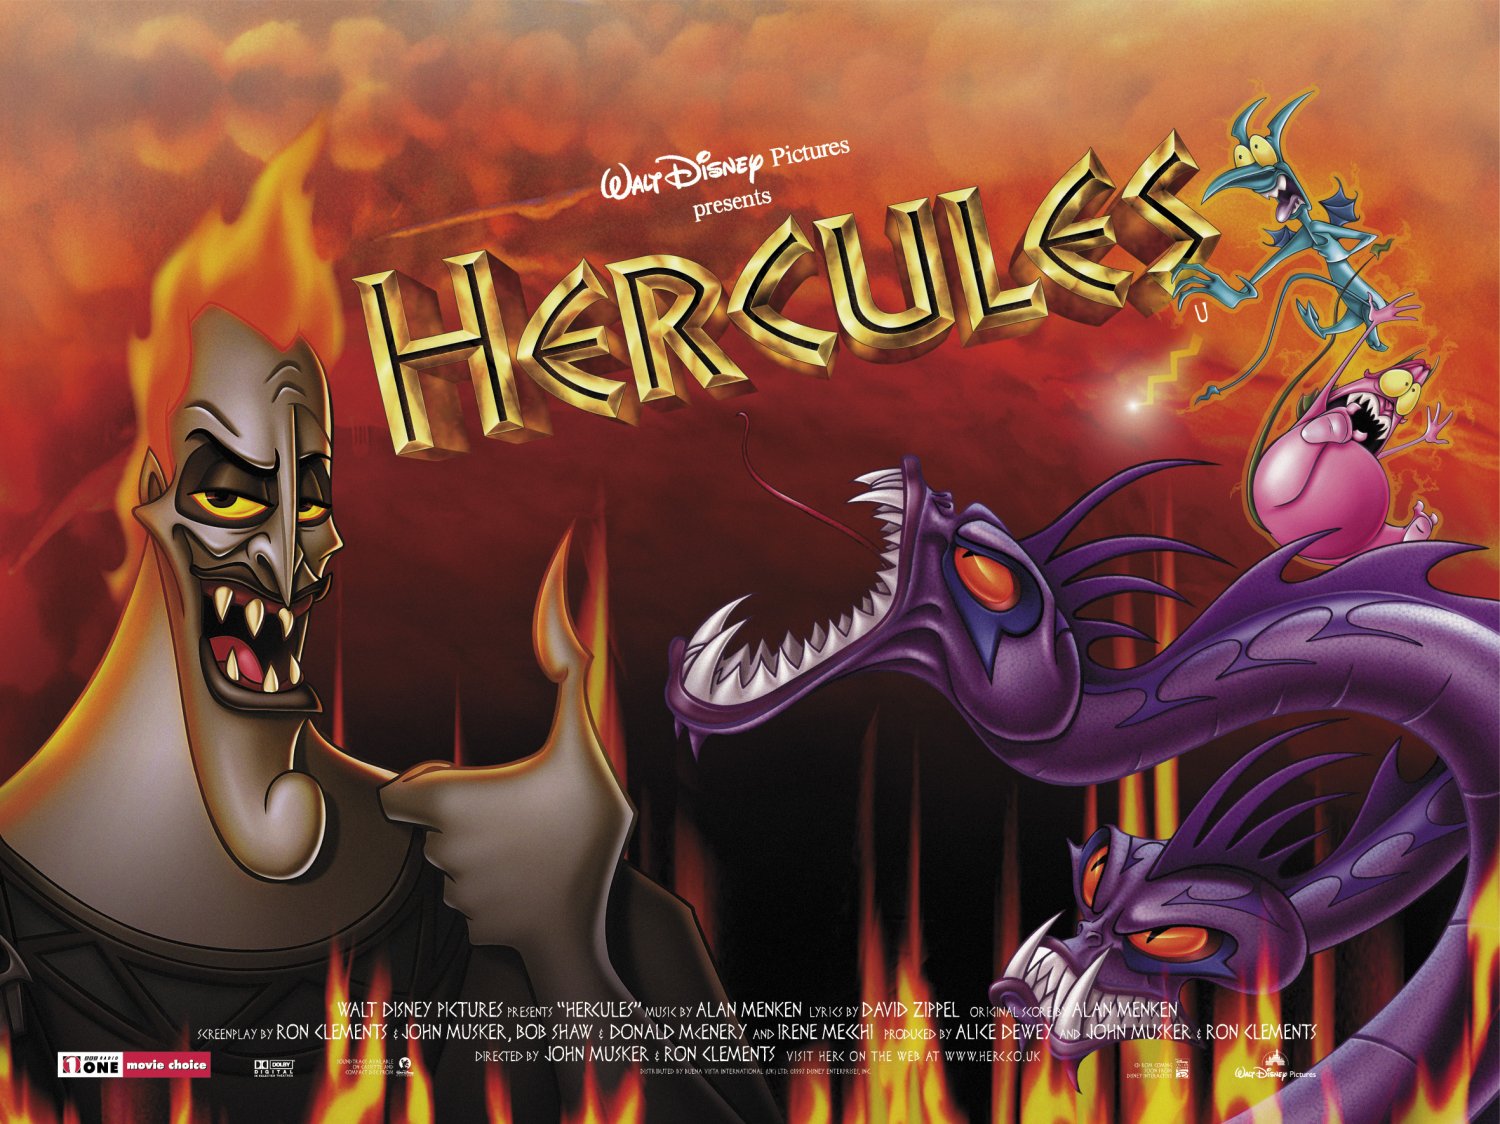 Extra Large Movie Poster Image for Hercules (#12 of 13)